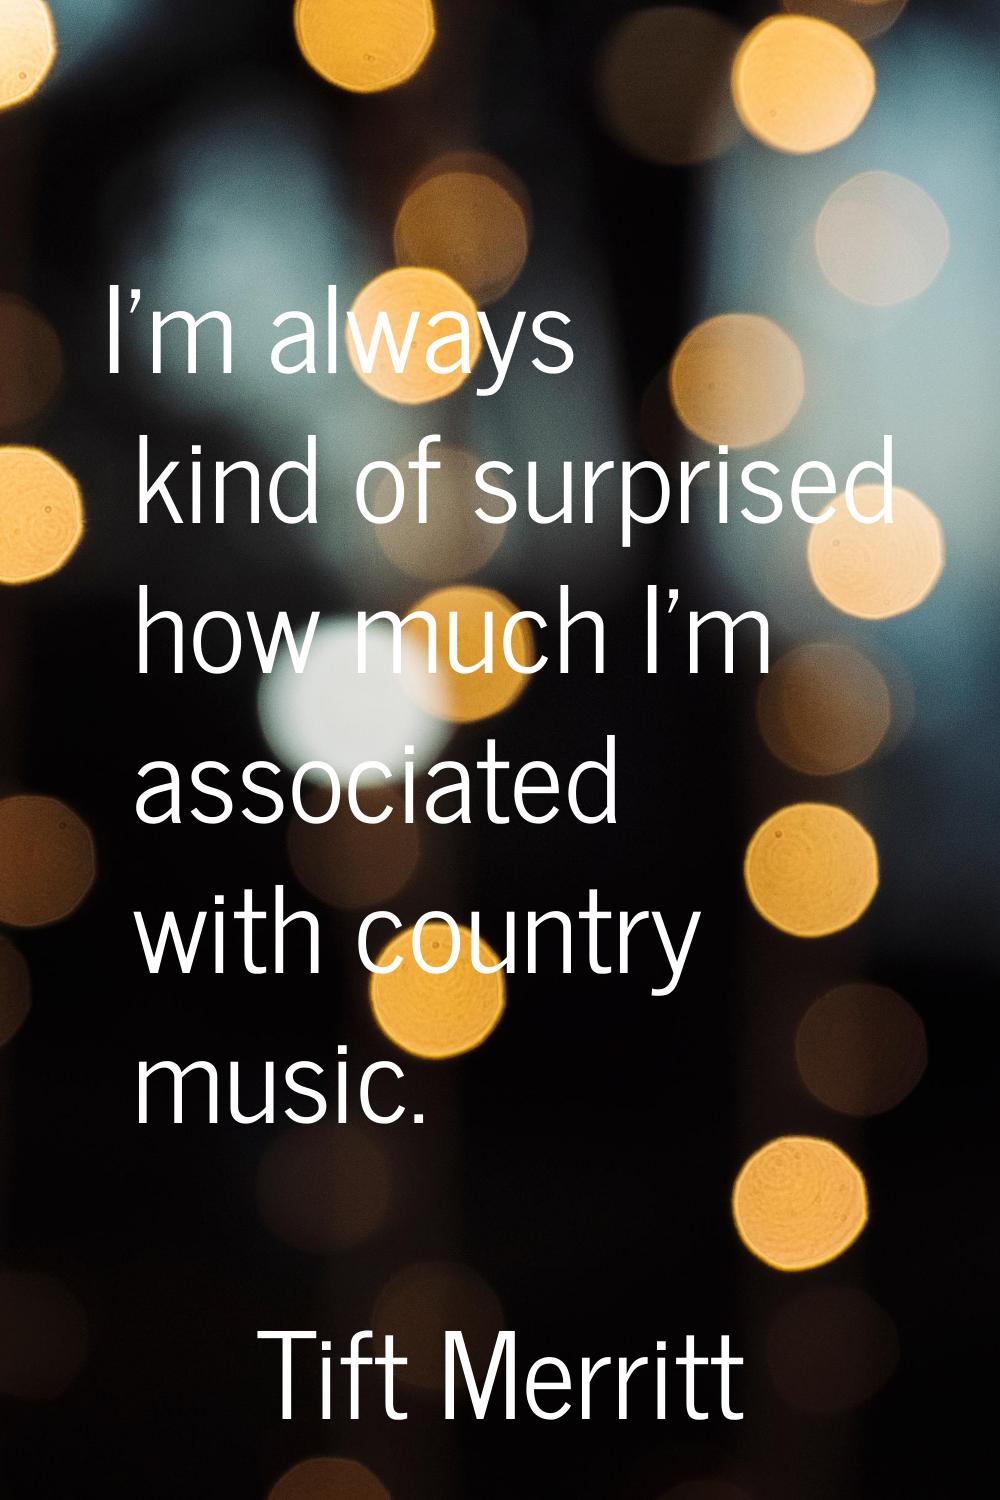 I'm always kind of surprised how much I'm associated with country music.